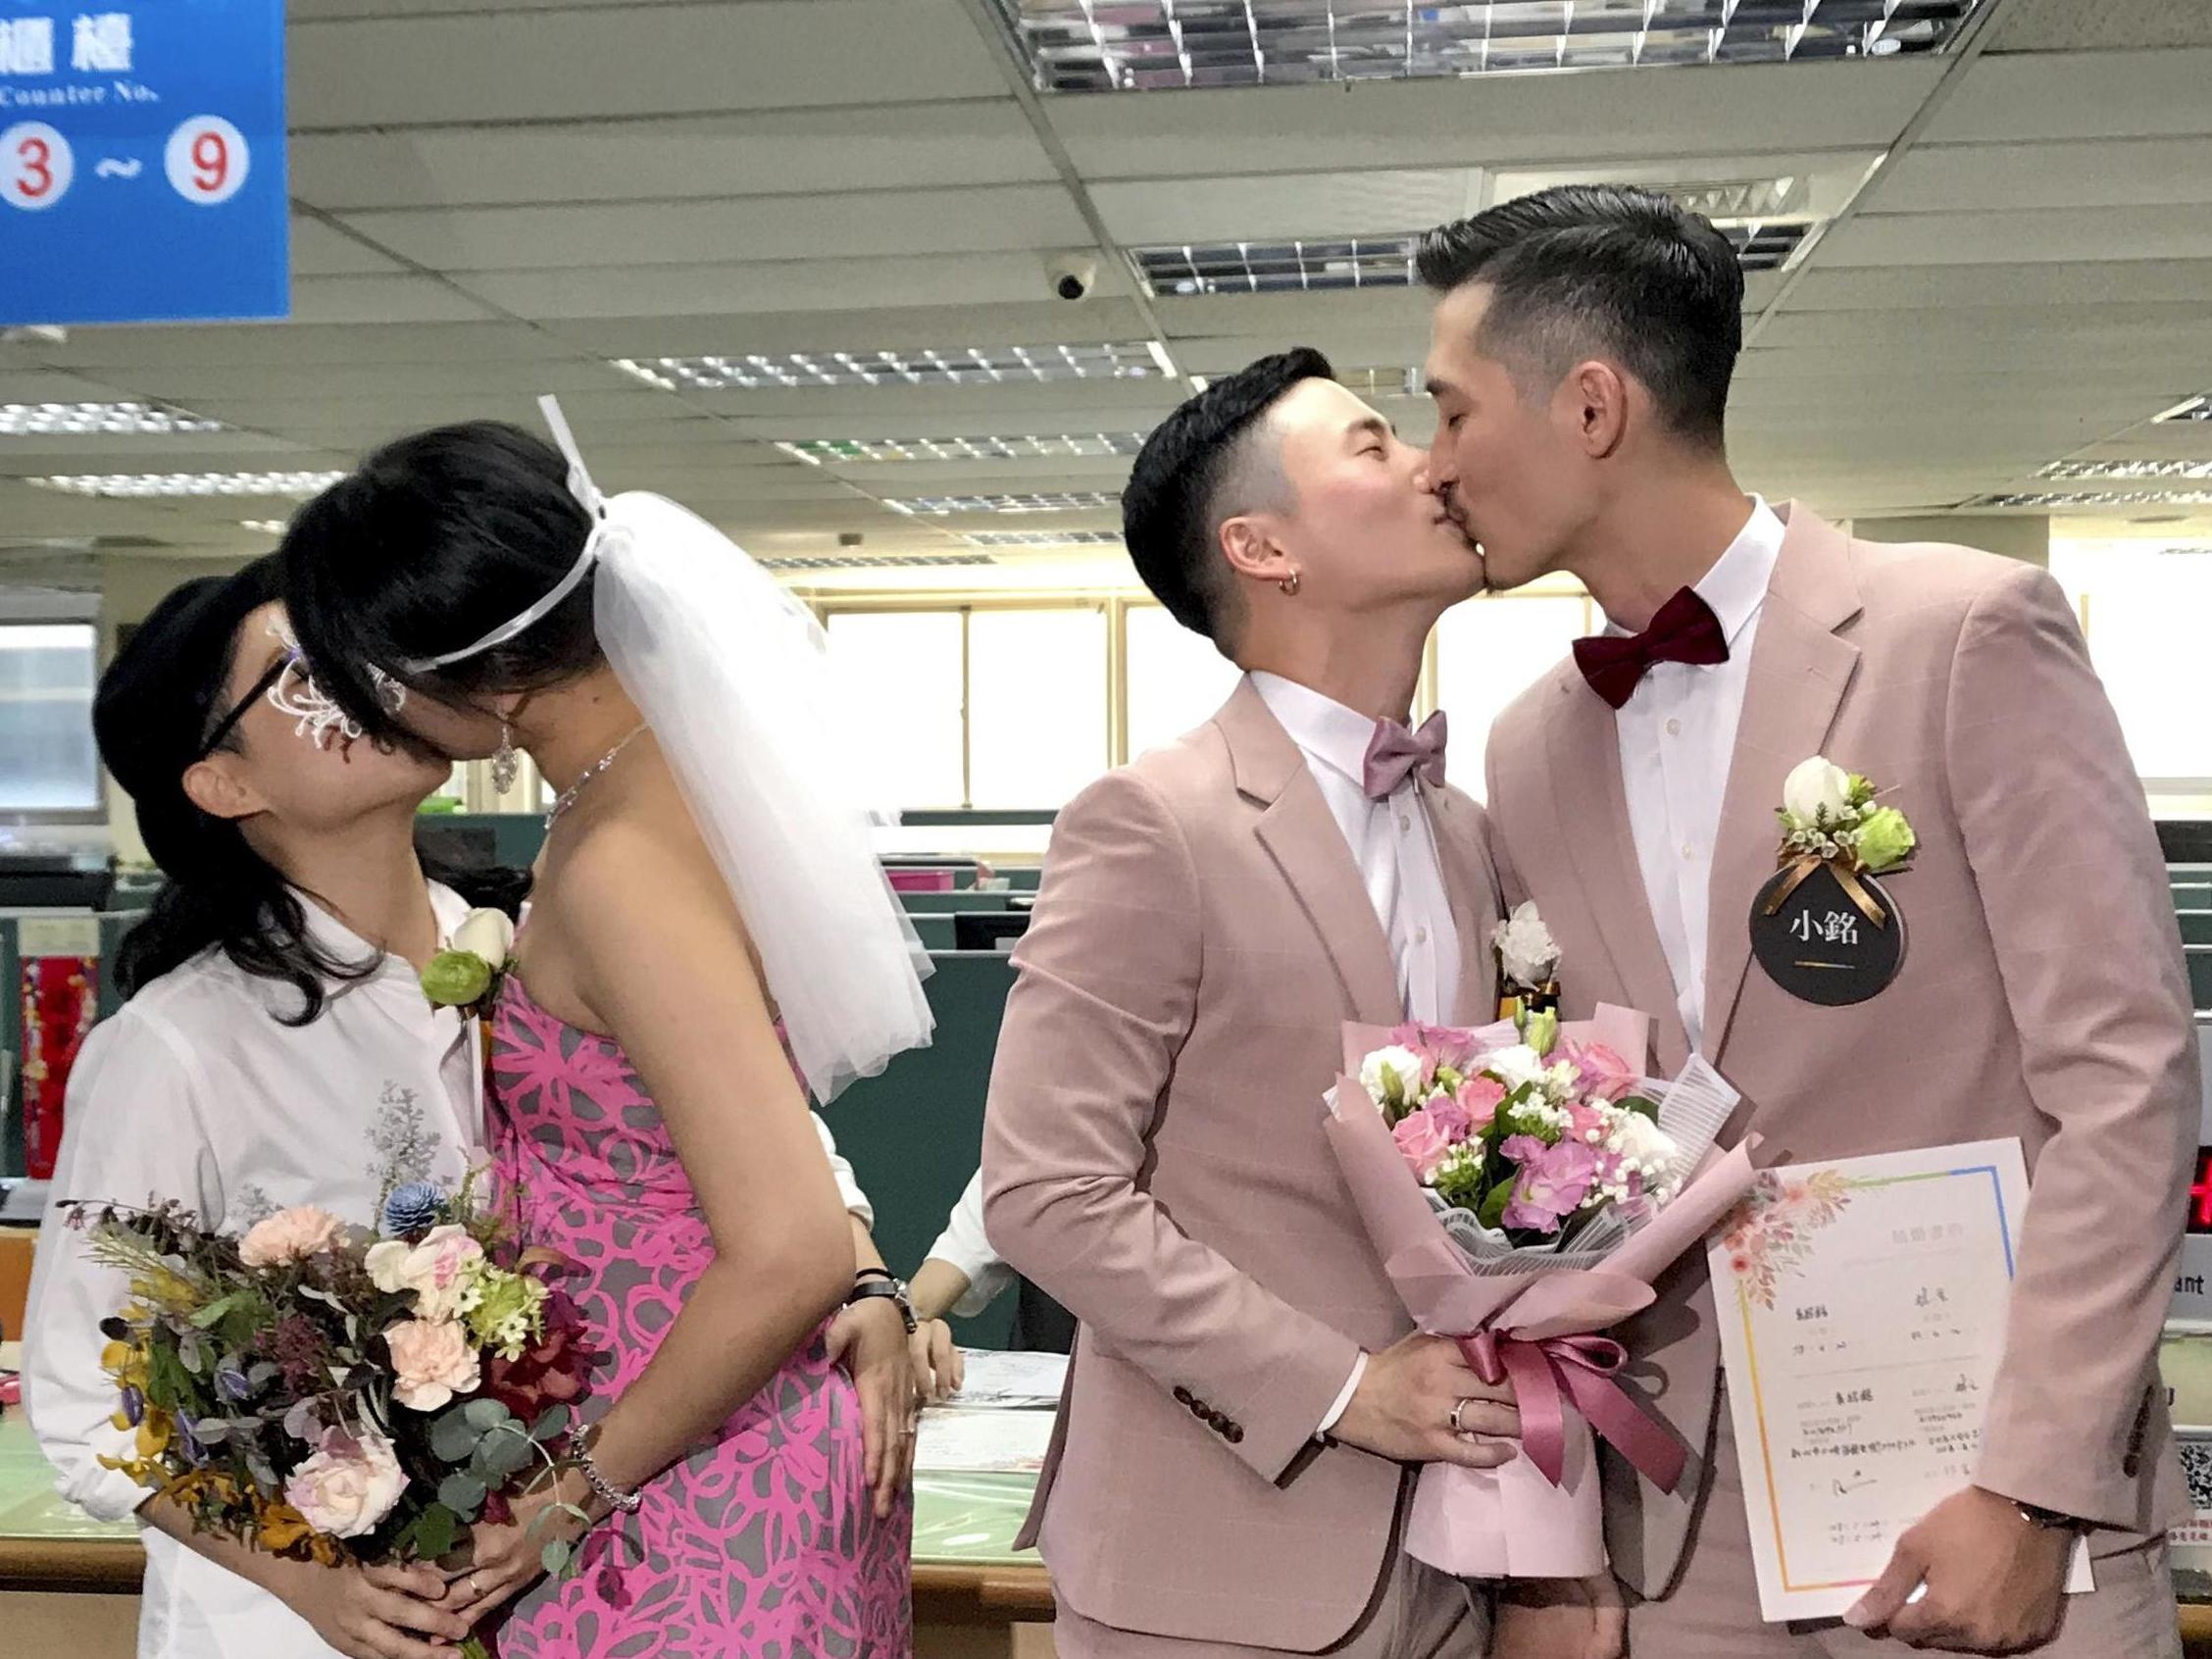 Hundreds marry on Taiwans first day of legal same-sex marriage after decades-long struggle The Independent The Independent